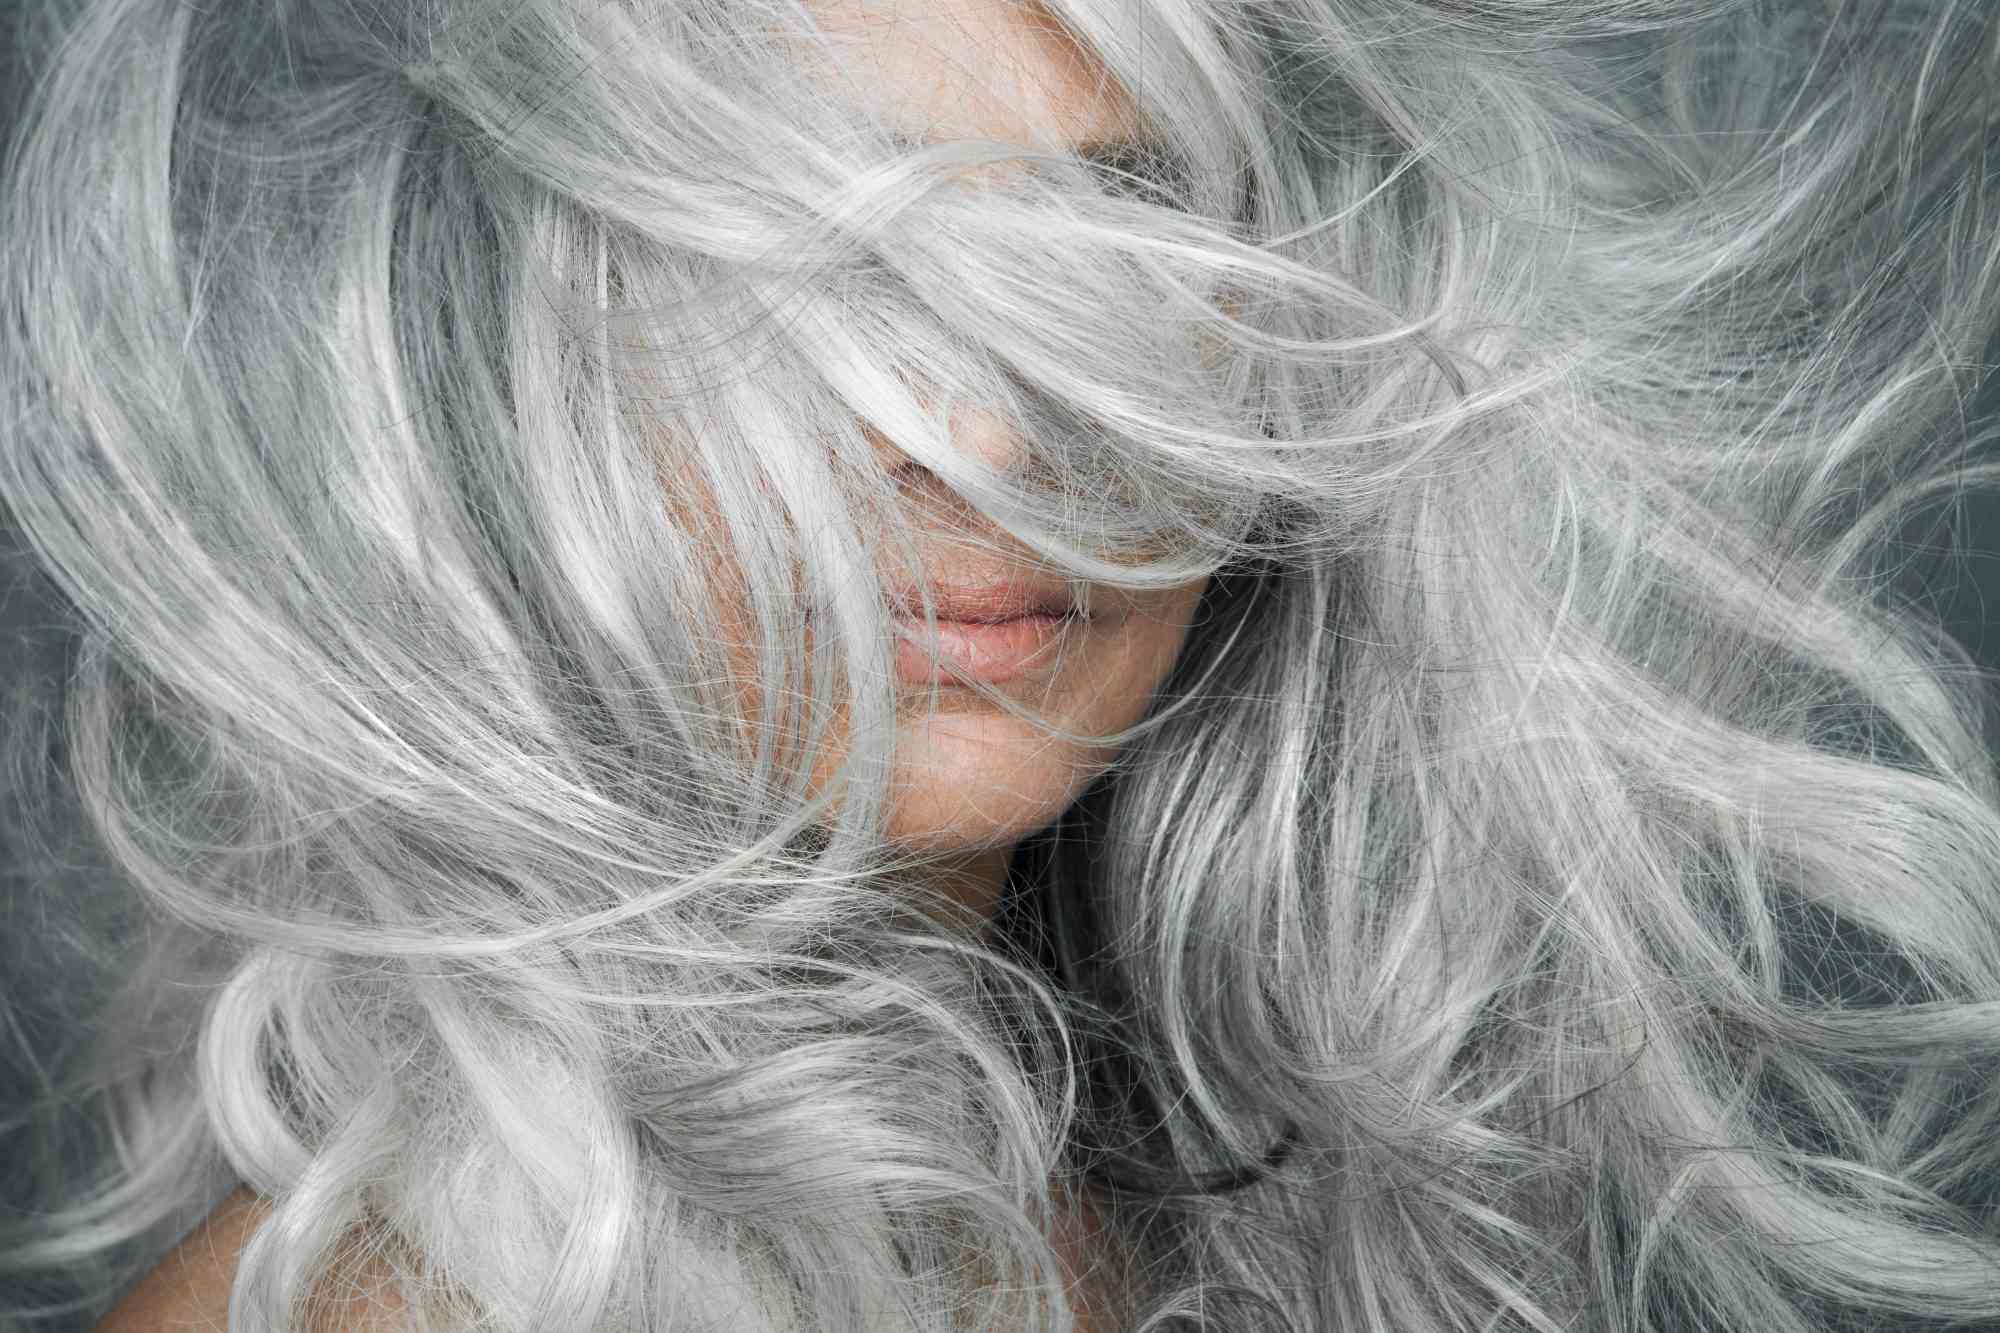 The Surprising Solution For Gray Hair: Sodium Bicarbonate Revealed!